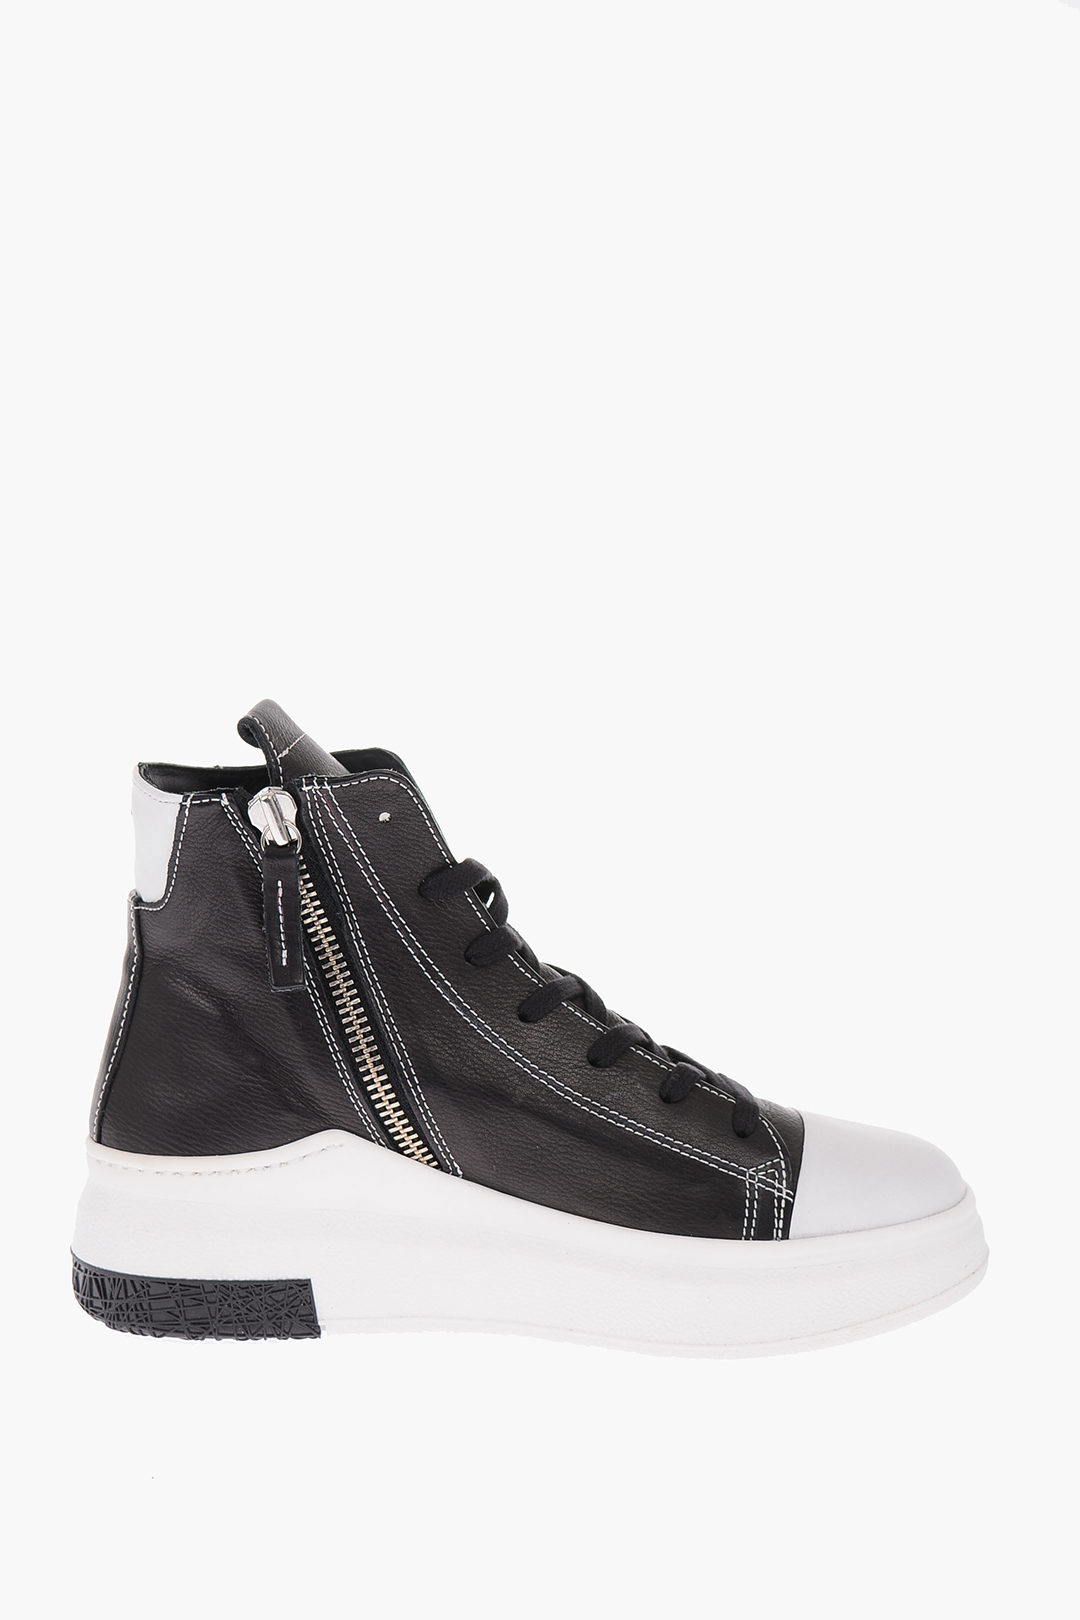 Cinzia Araia leather Platform sneakers with side zip men - Glamood Outlet